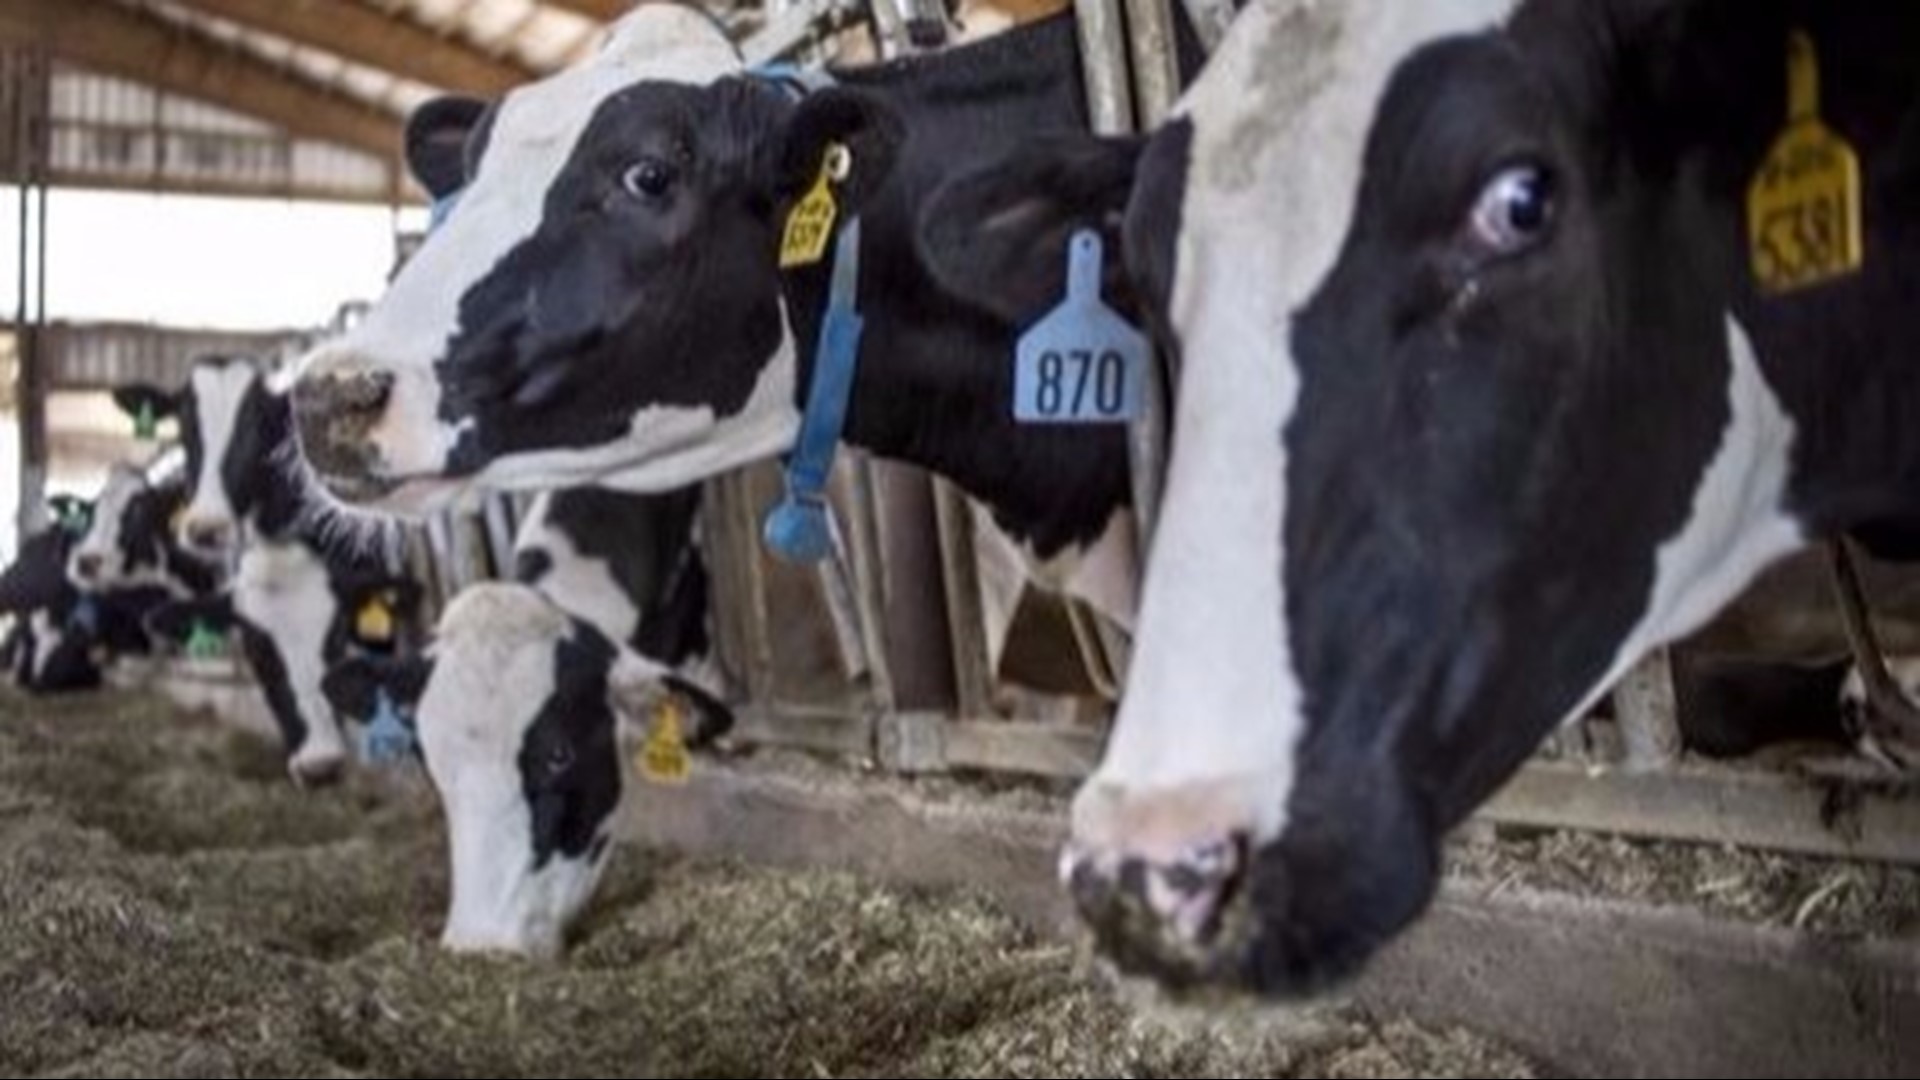 Milk production remains uninterrupted as more and more farmers are going out of business in Michigan.